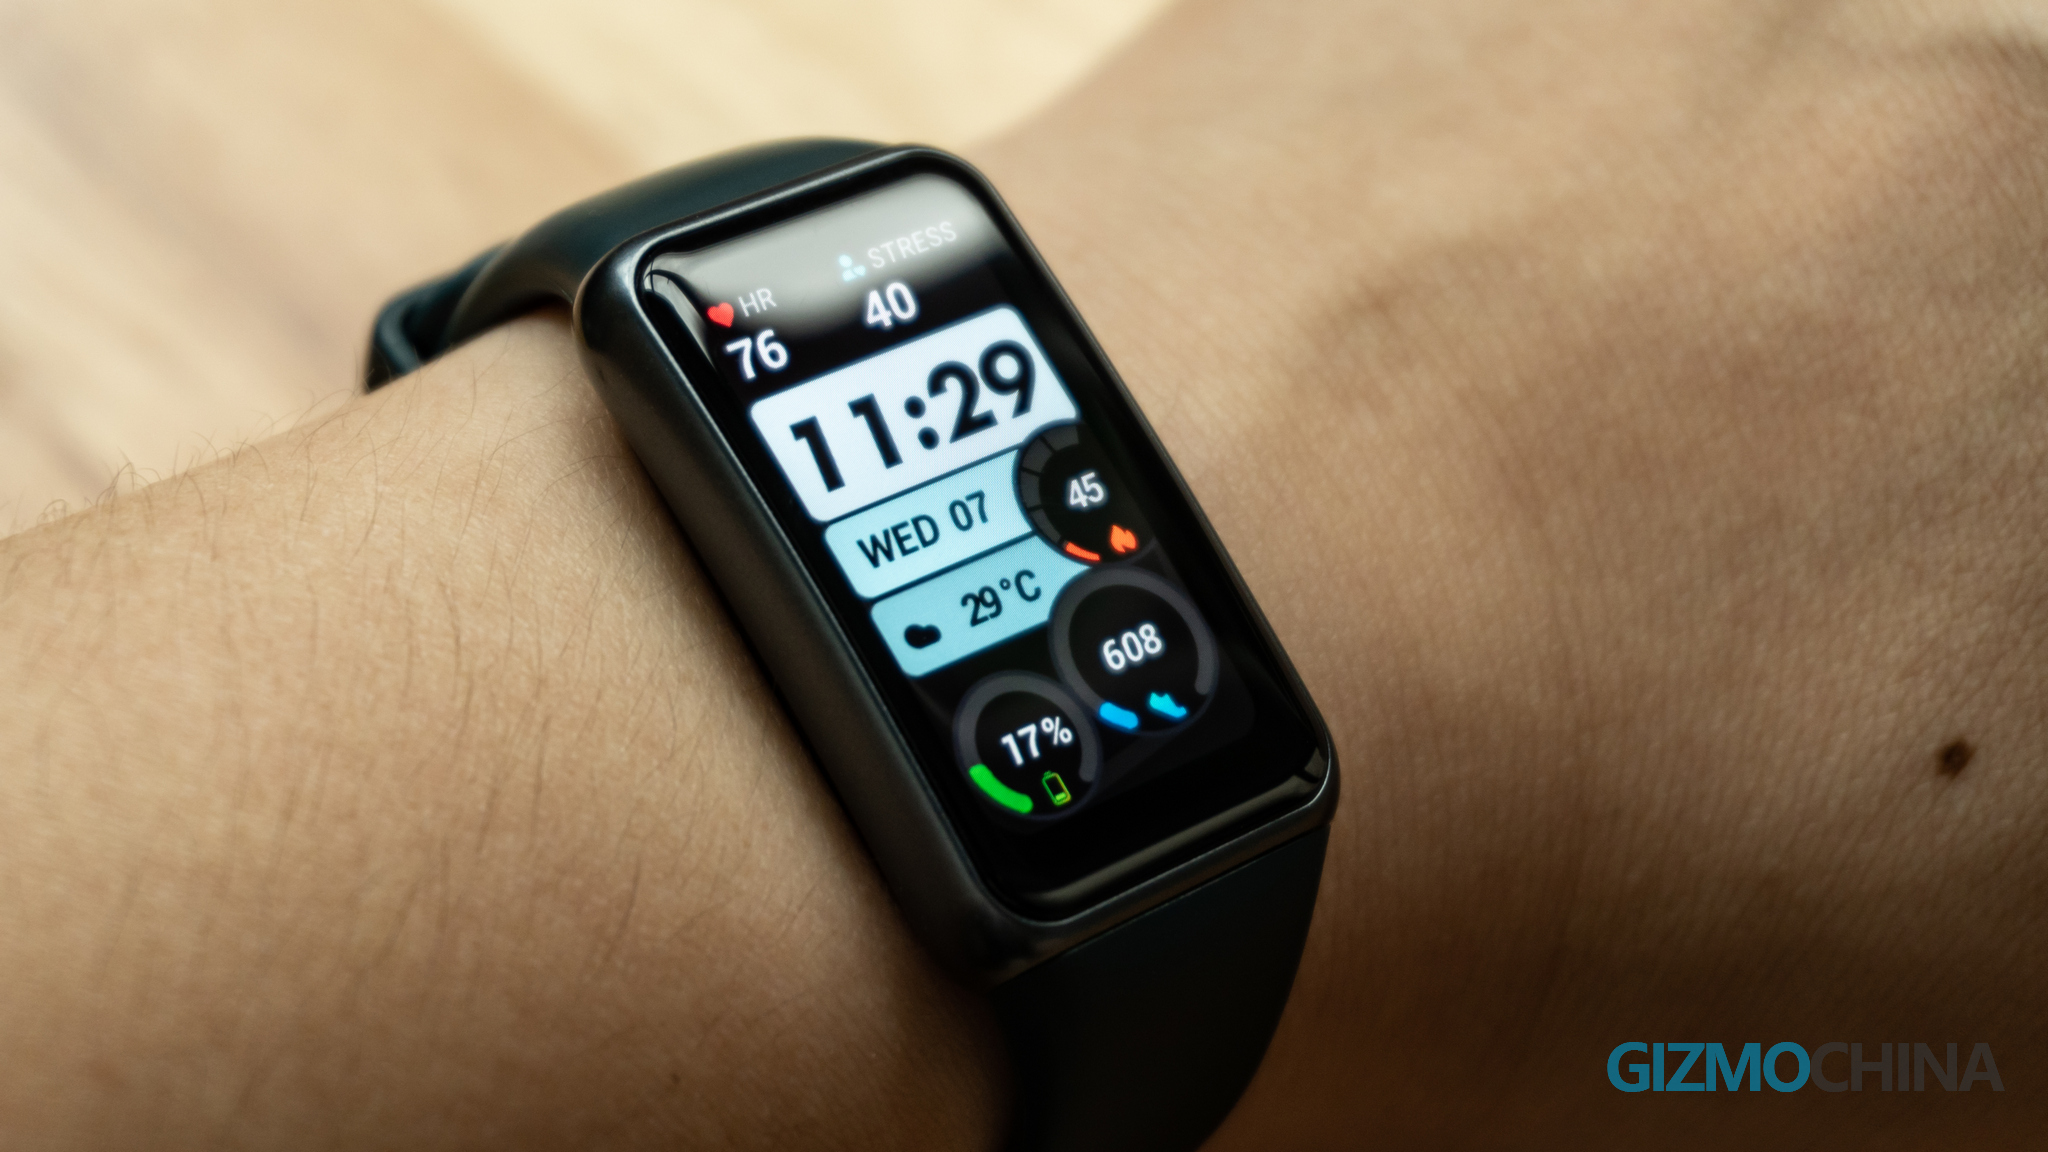 Huawei Band 6 review  139 facts and highlights